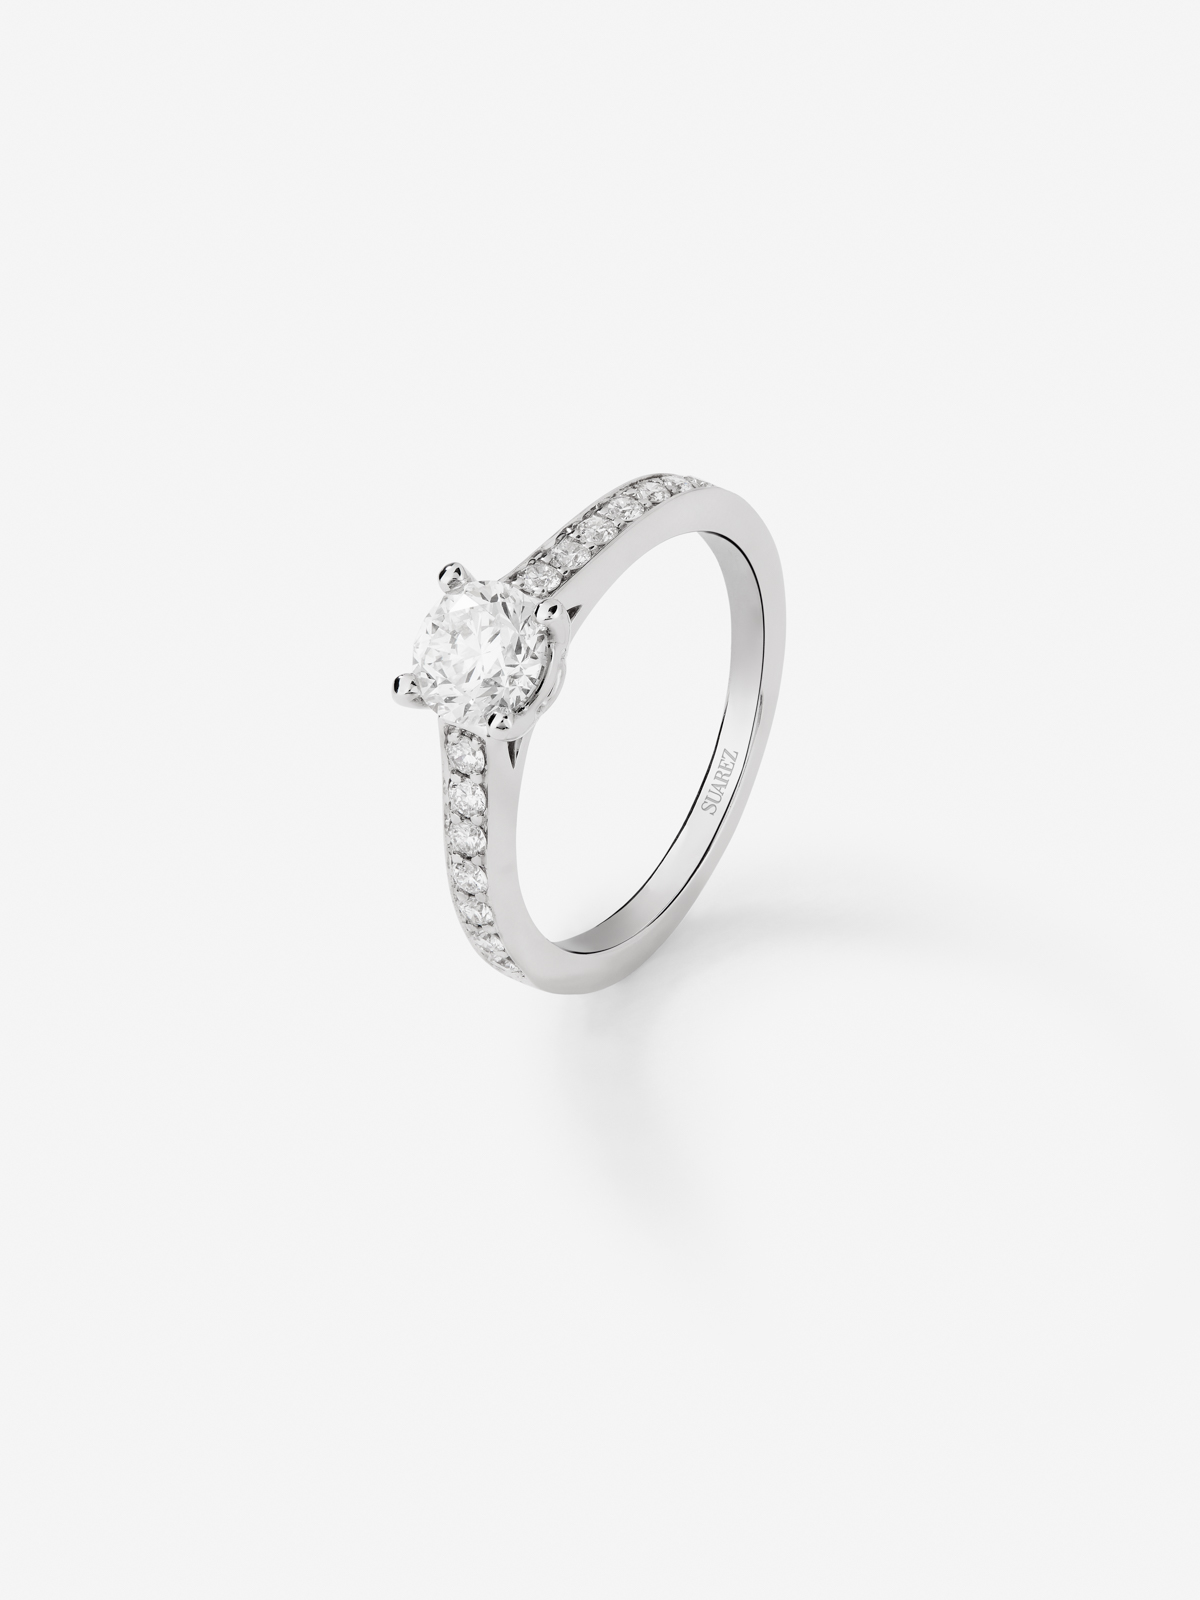 18K white gold solitaire engagement ring with diamonds